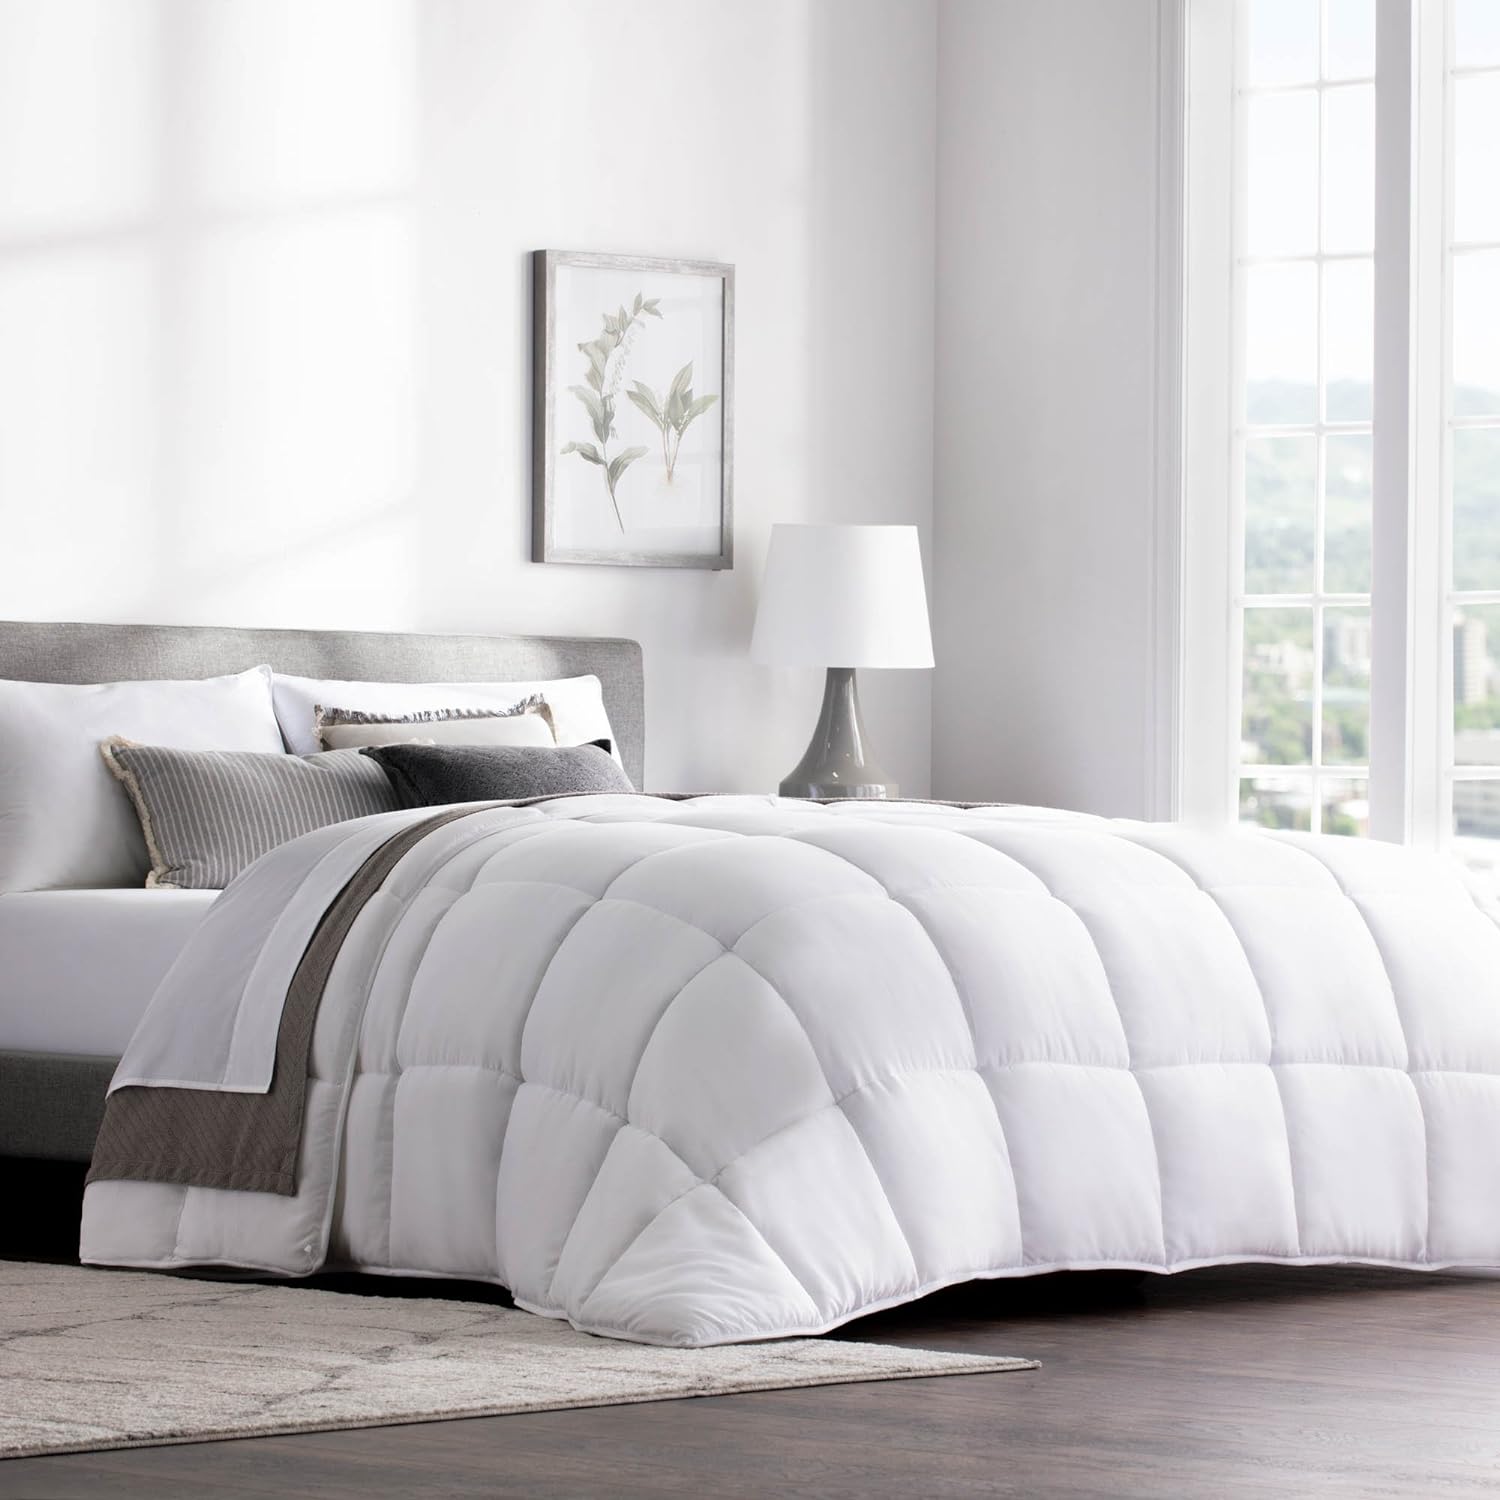 WEEKENDER Comforter Duvet Insert Oversized King White Quilted Down Alternative All Season Microfiber - Oversized King - Box Stitched